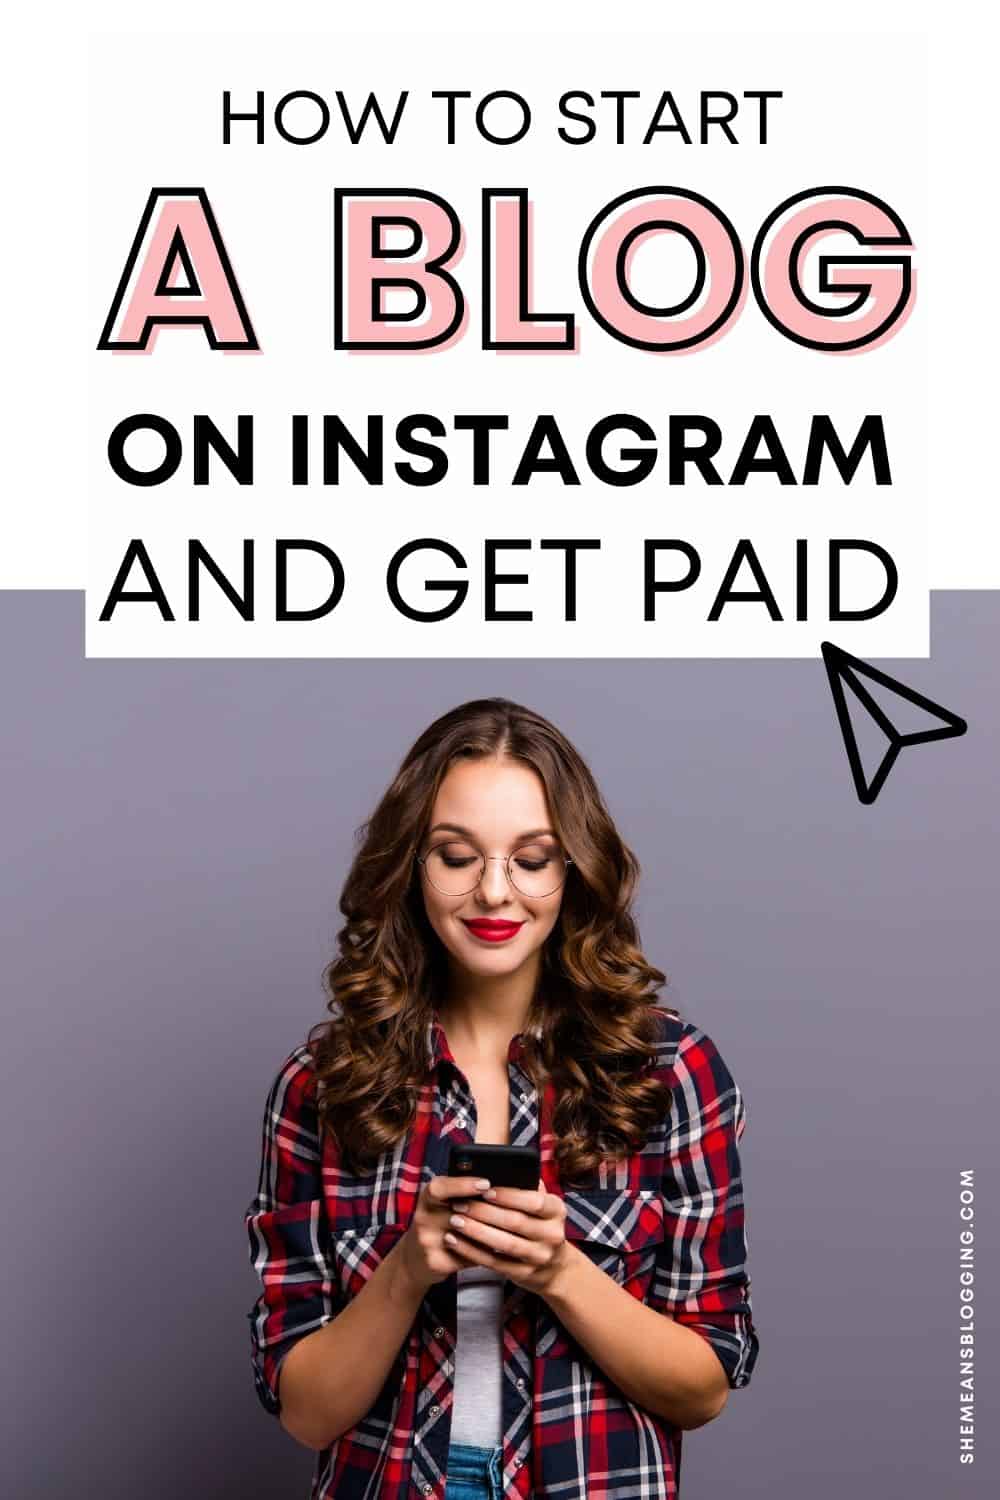 How to Start a Blog on Instagram and Get Paid (With no Experience)